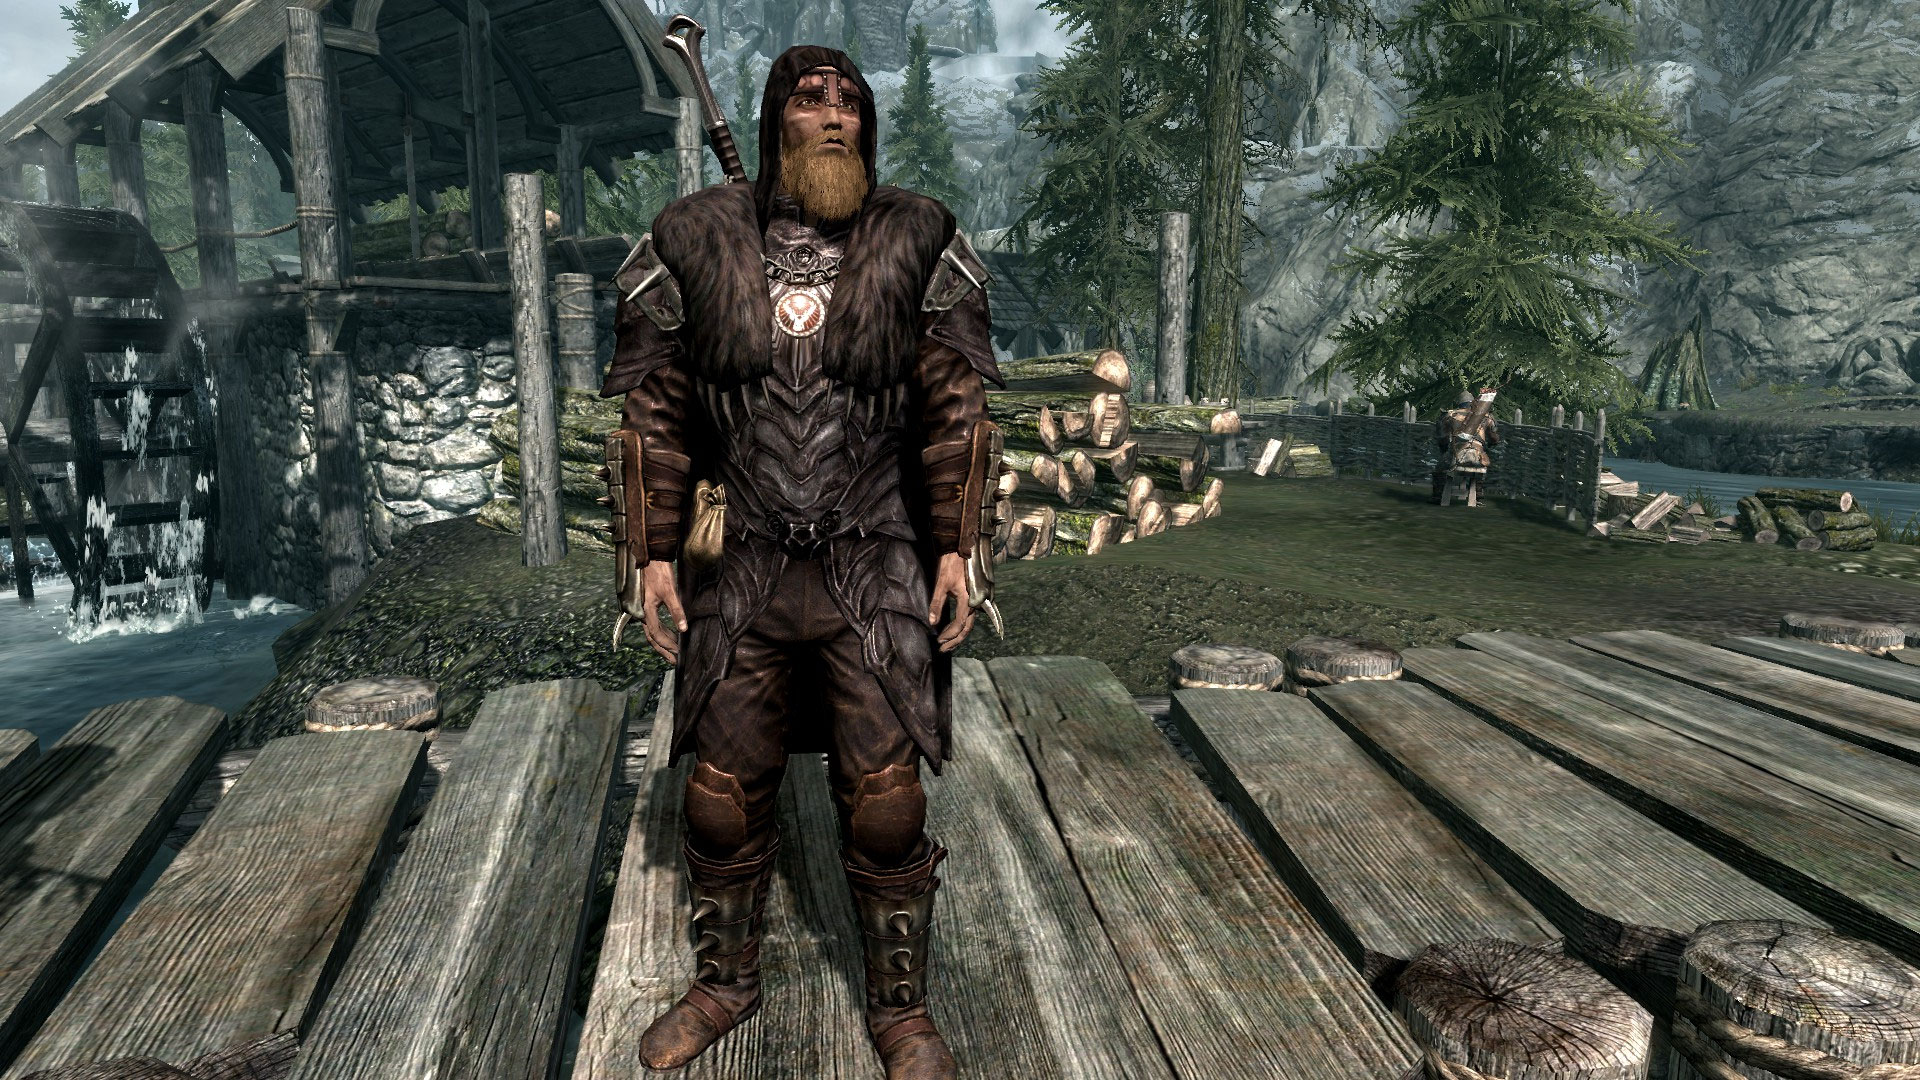 Immersive Patrols adds a reasonable amount of Stormcloak, Thalmor, imperial...